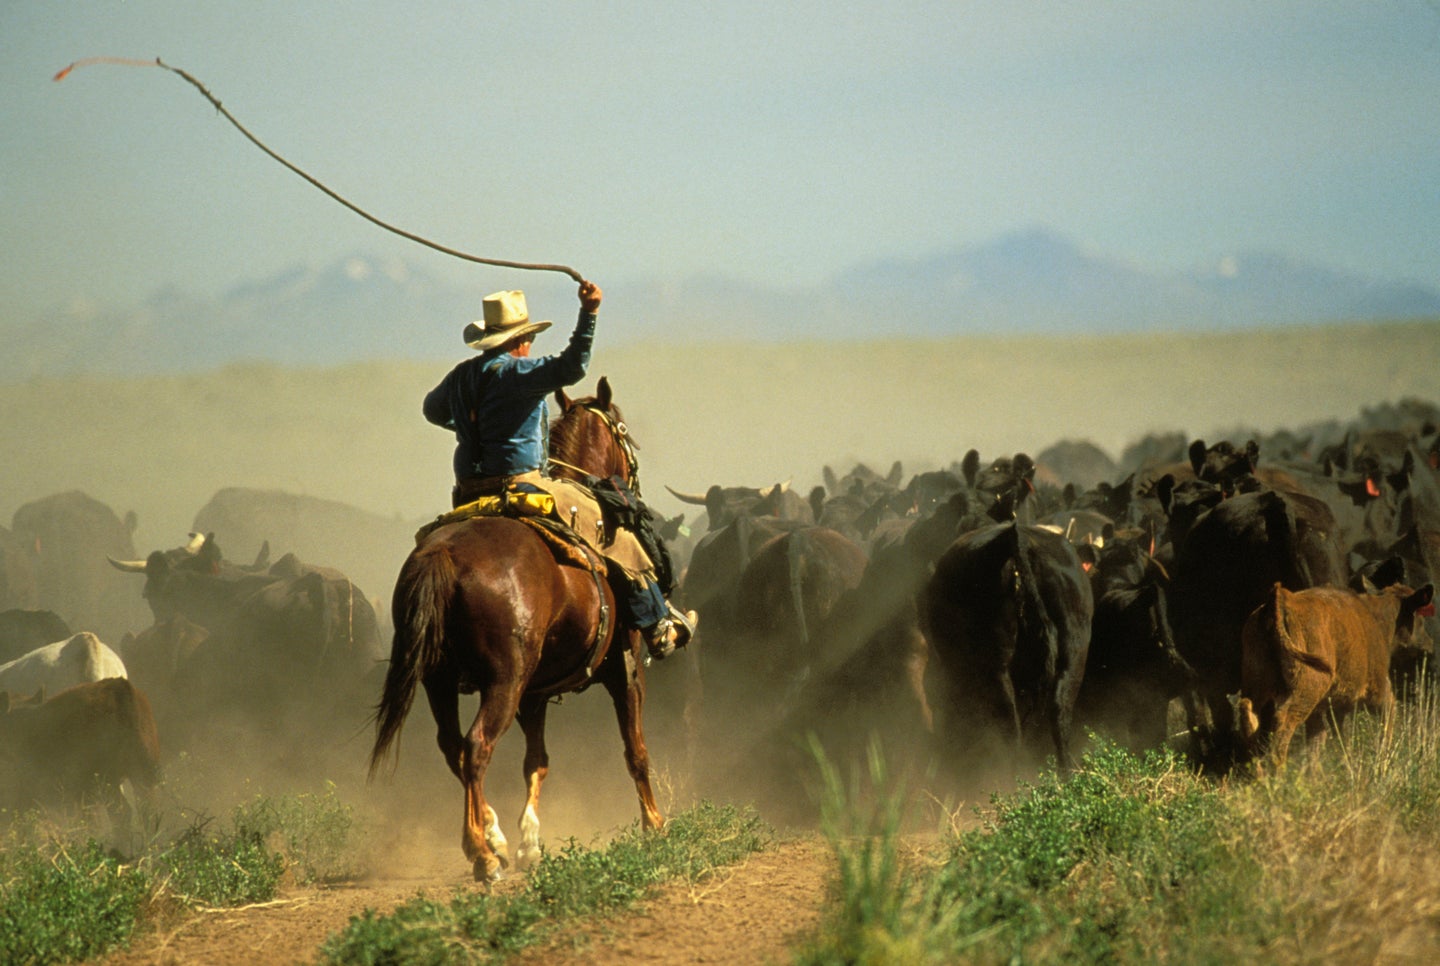 Senior cowboy on horse using bullwhip, driving cattle, rear view